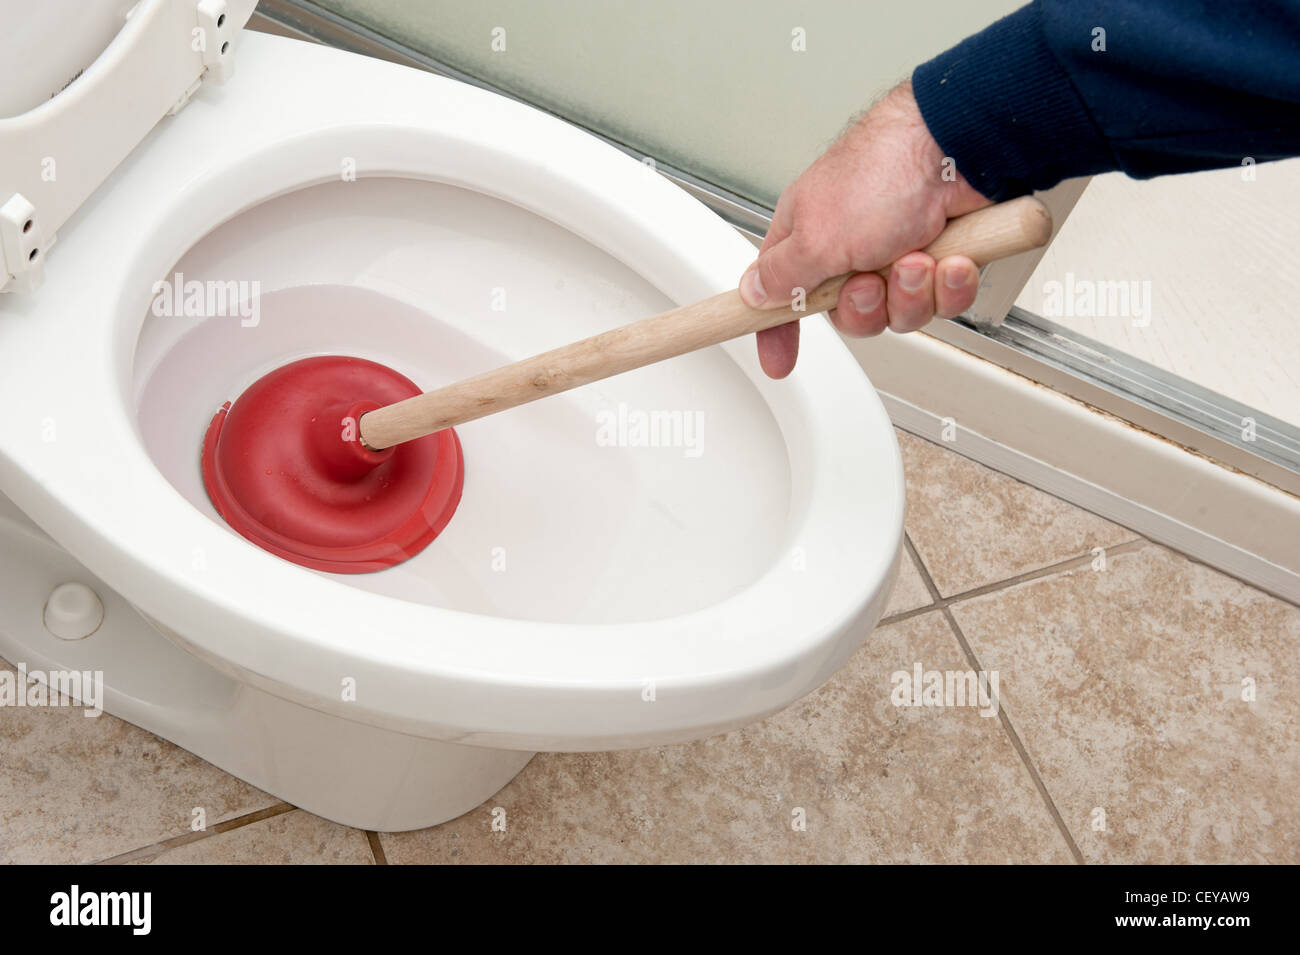 https://c8.alamy.com/comp/CEYAW9/a-plumber-uses-a-plunger-to-unclog-a-toilet-CEYAW9.jpg